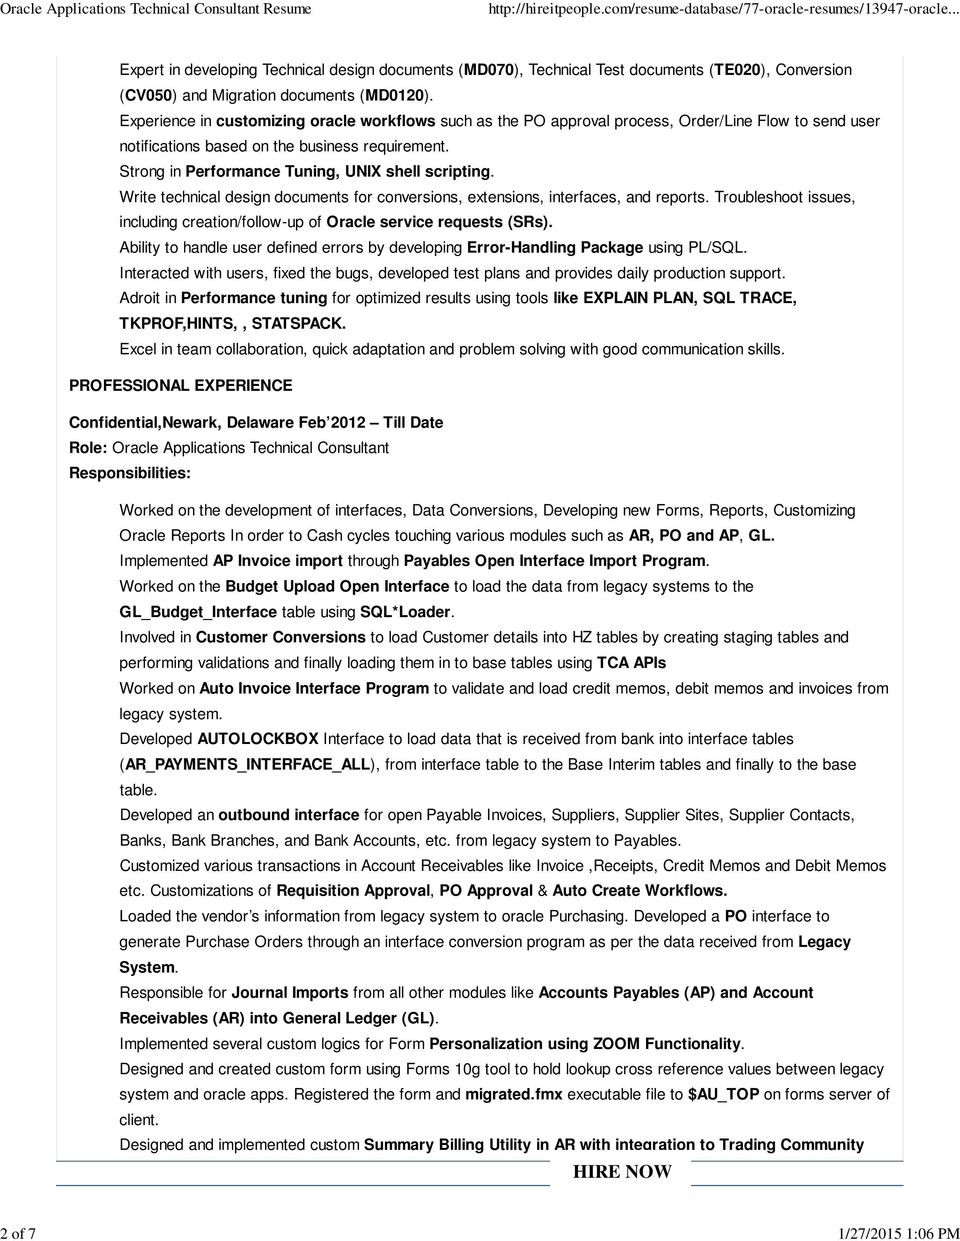 Oracle Apps Functional Consultant Resume Sample Crm Functional Consultant Job Description